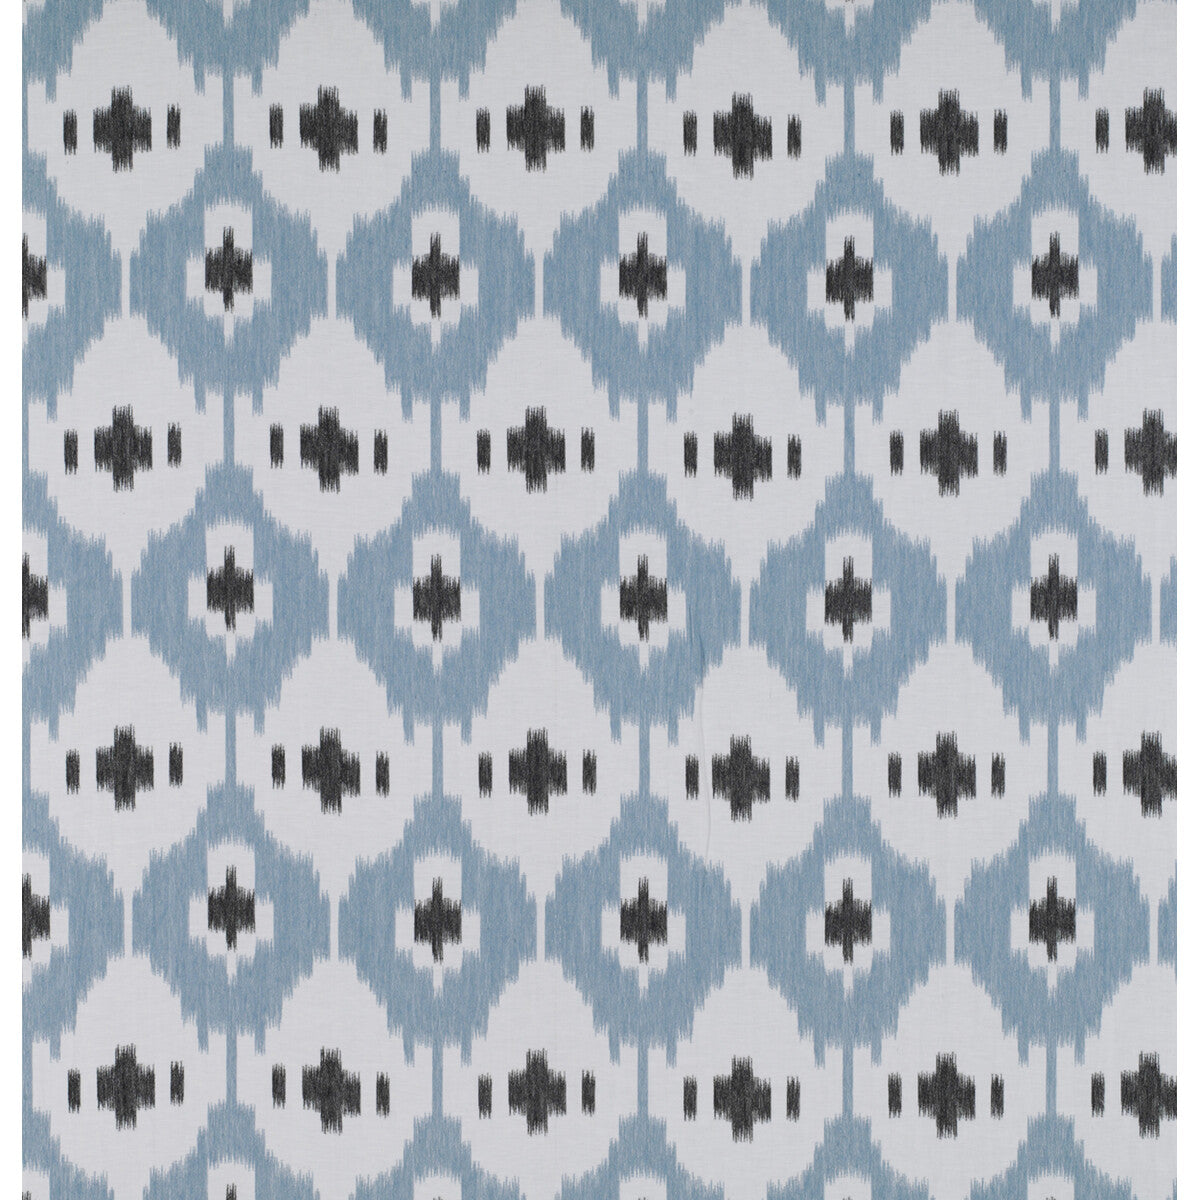 Panarea fabric in azul claro/onyx color - pattern GDT5315.006.0 - by Gaston y Daniela in the Tierras collection